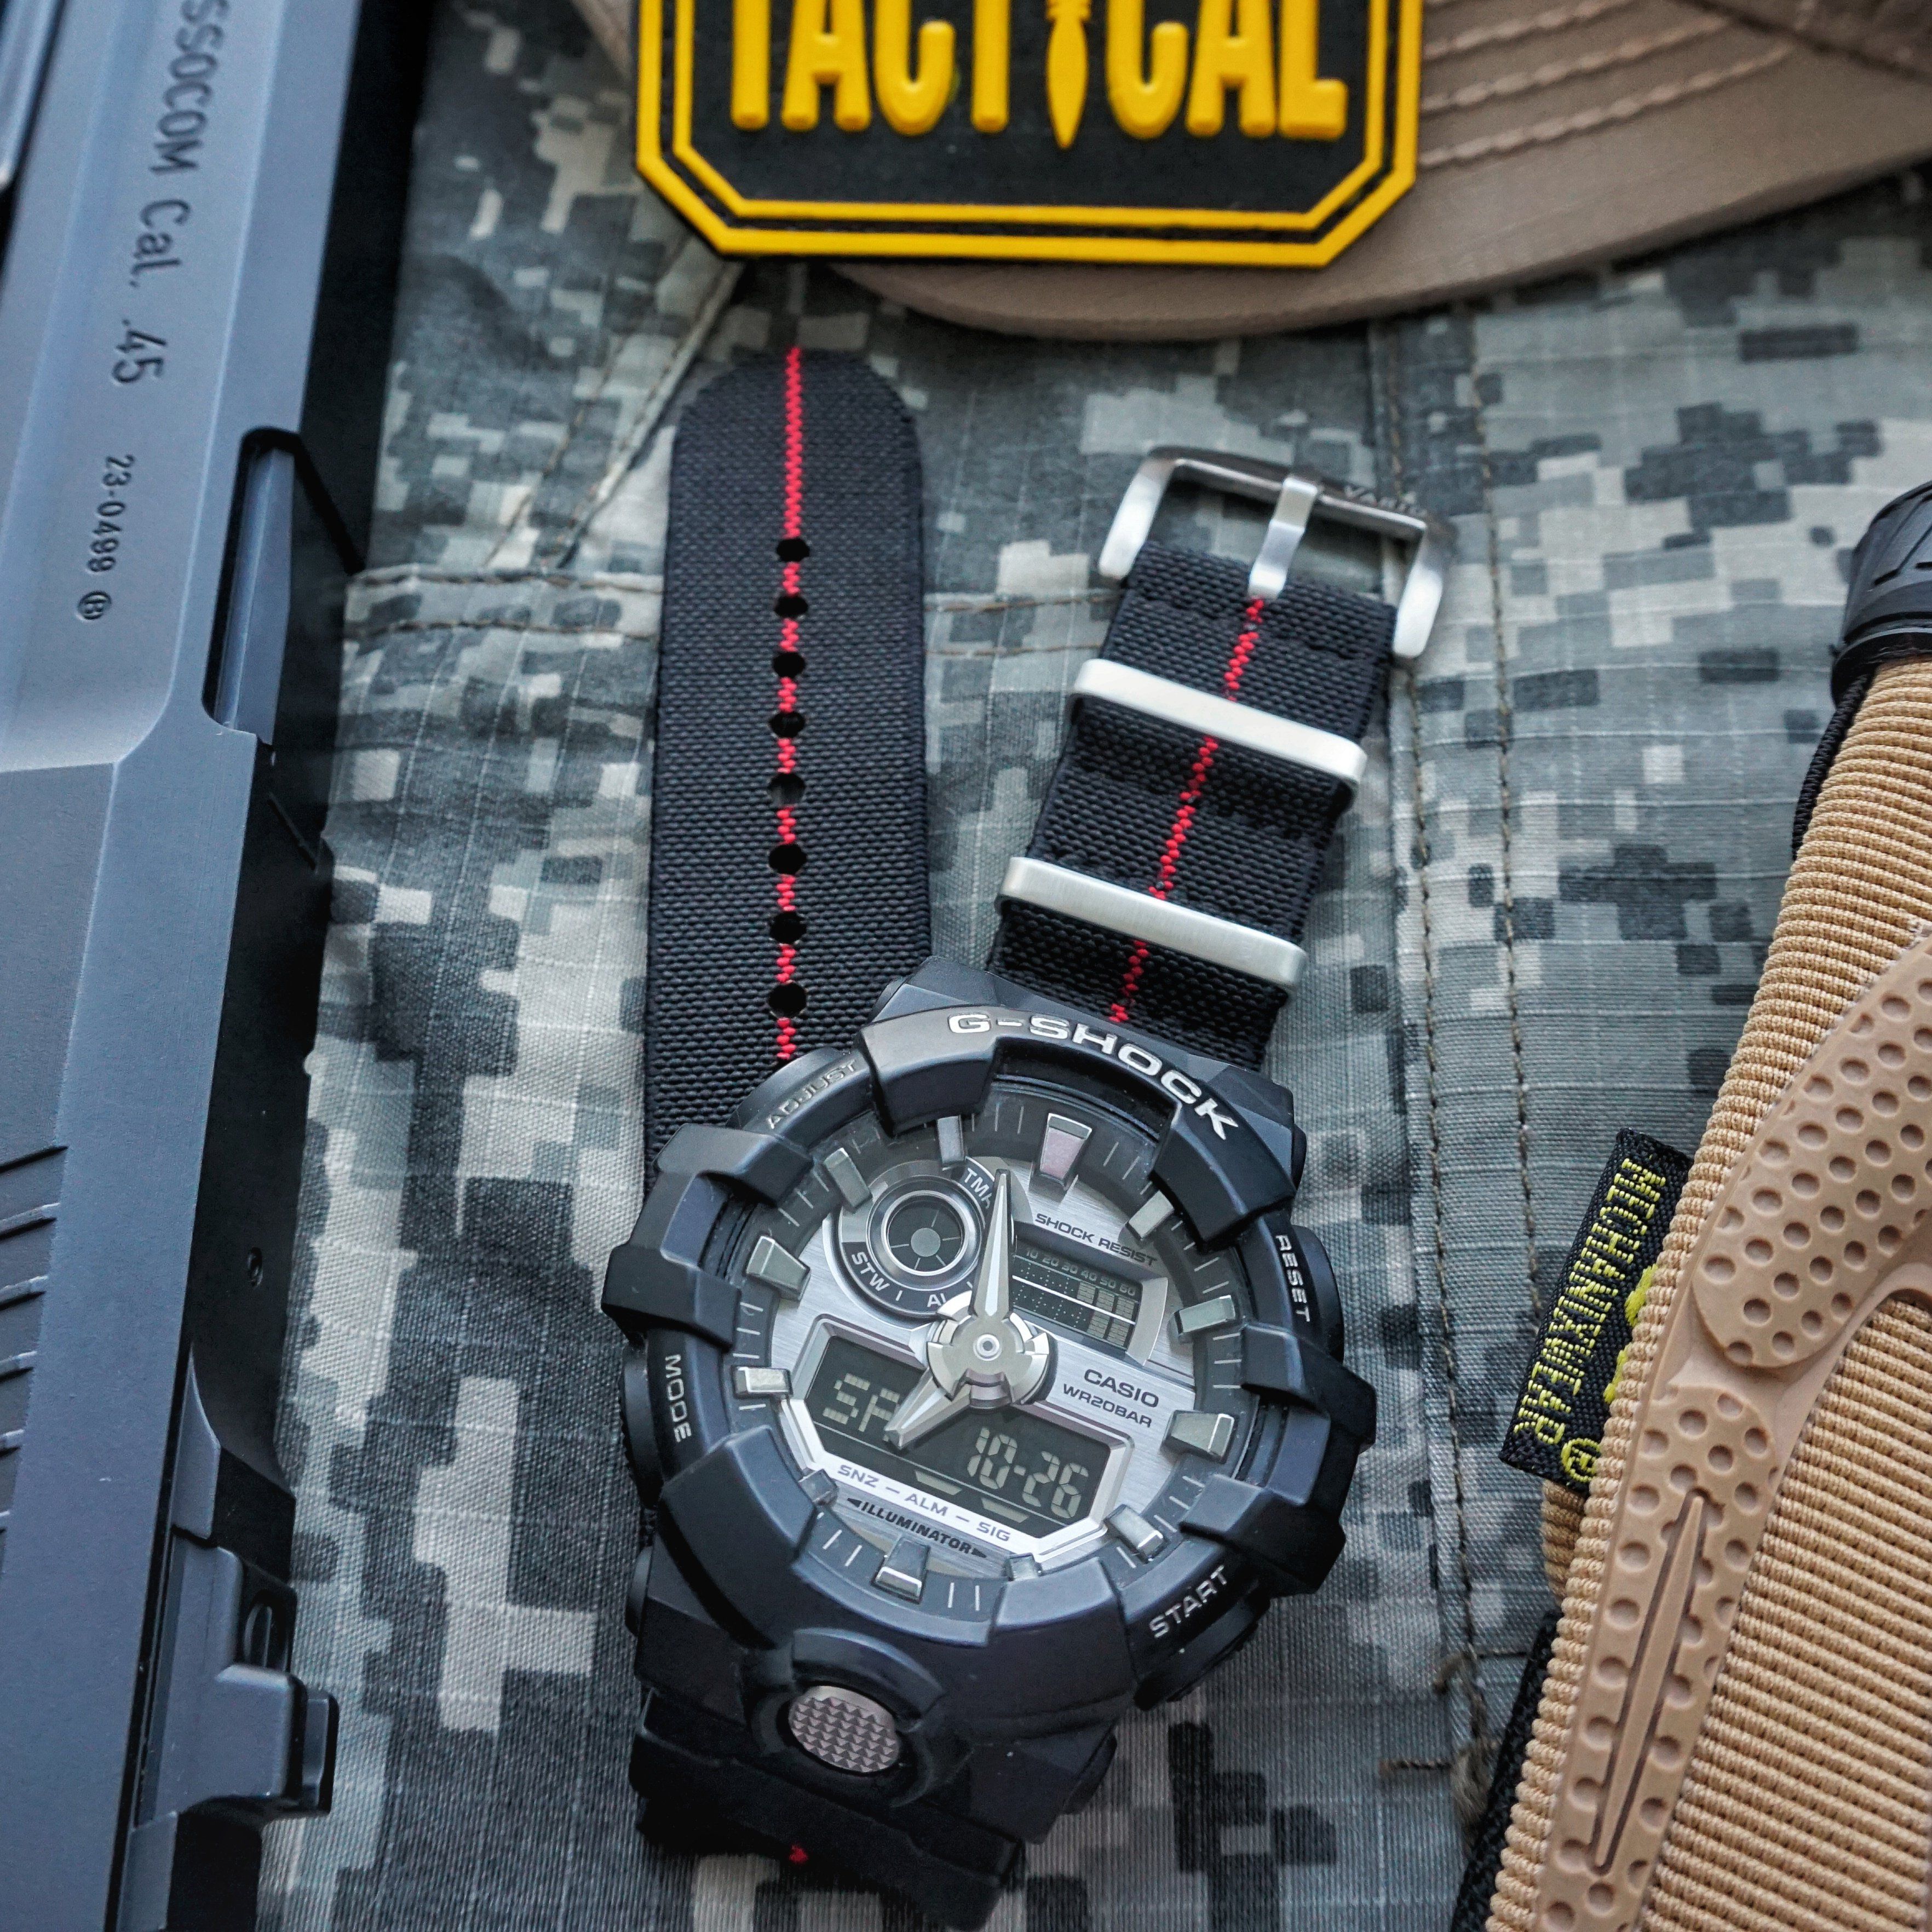 Our elastic works well with G-Shocks. Pick up a few and you won't regret it. Photo by #varioeveryday member @rvmarv42